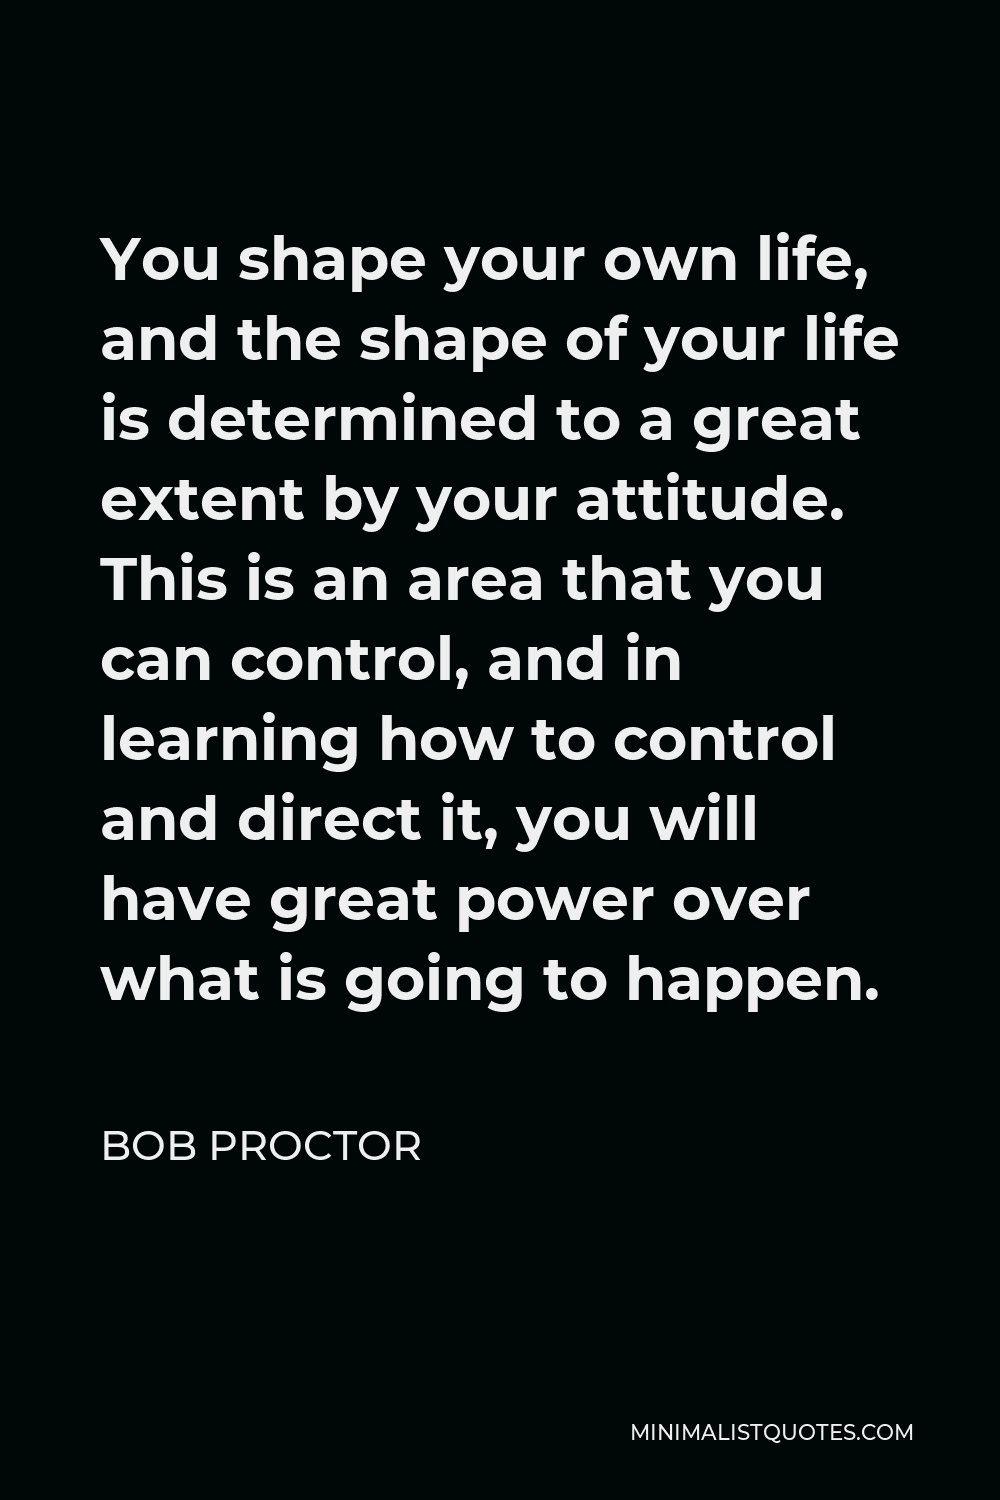 Bob Proctor Quote - You shape your own life, and the shape of your life is determined to a great extent by your attitude. This is an area that you can control, and in learning how to control and direct it, you will have great power over what is going to happen.